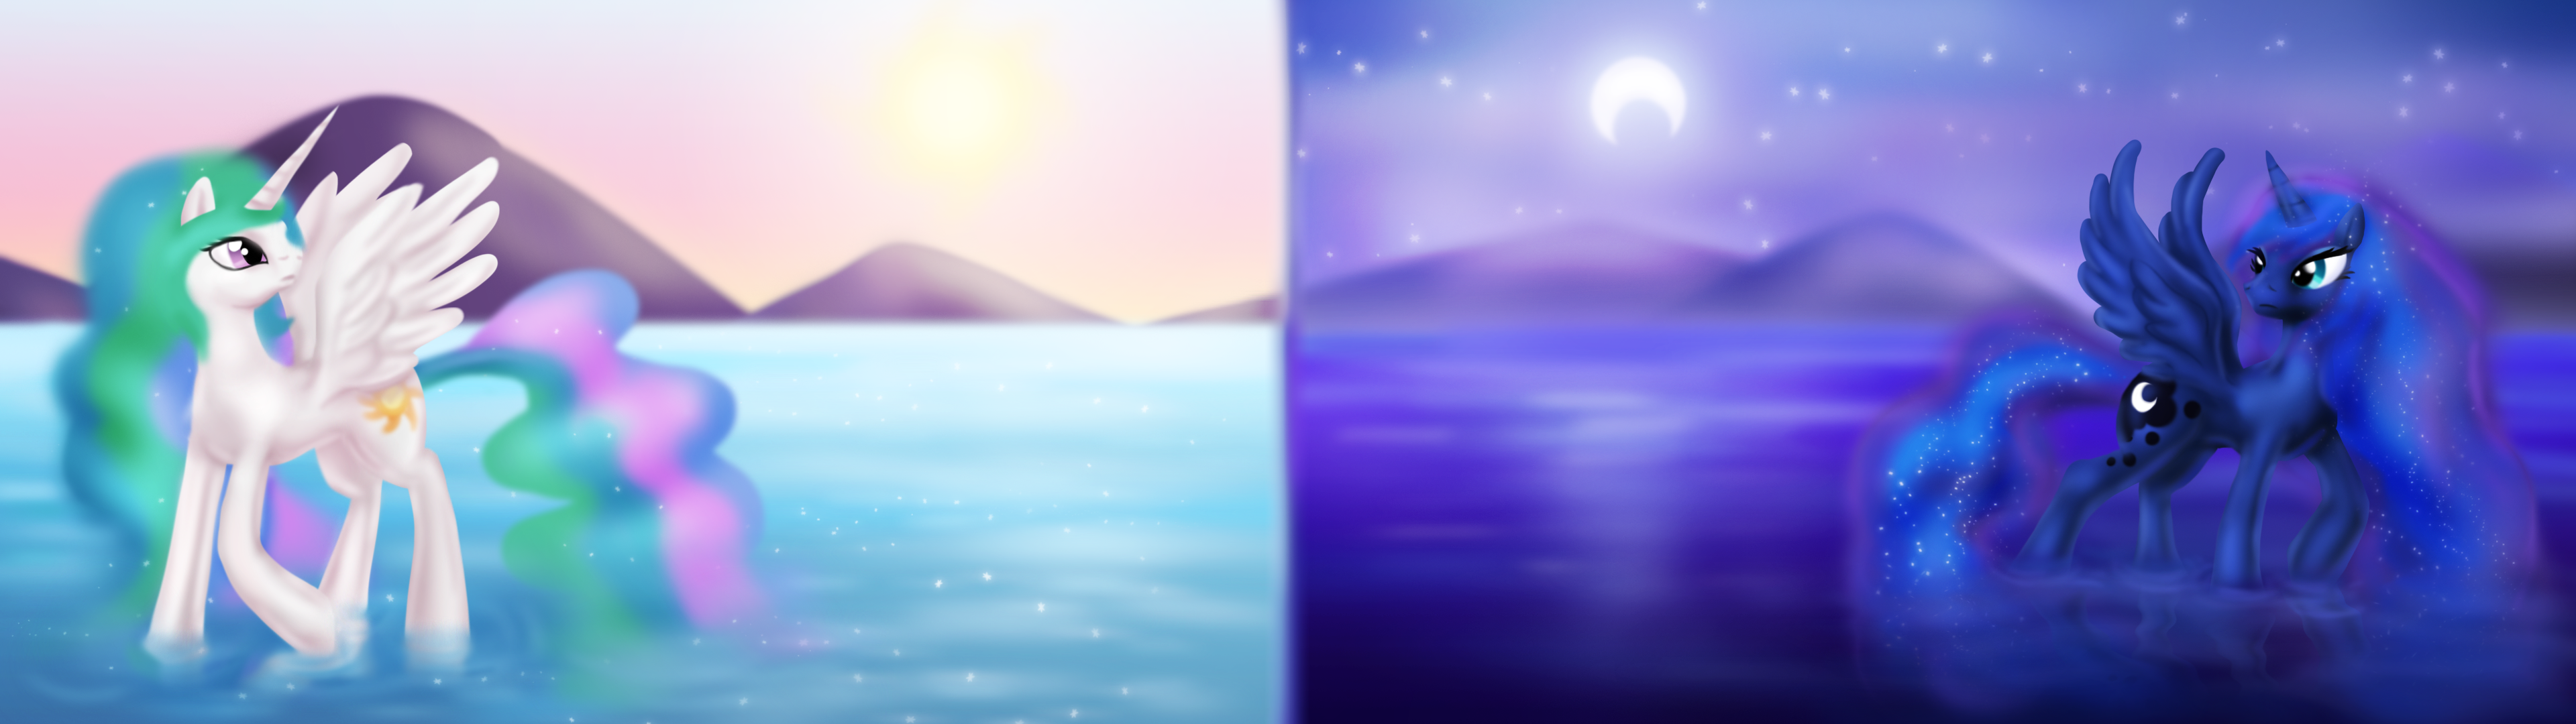 Daybreak and Midnight over the Lake 1080p by Zedrin